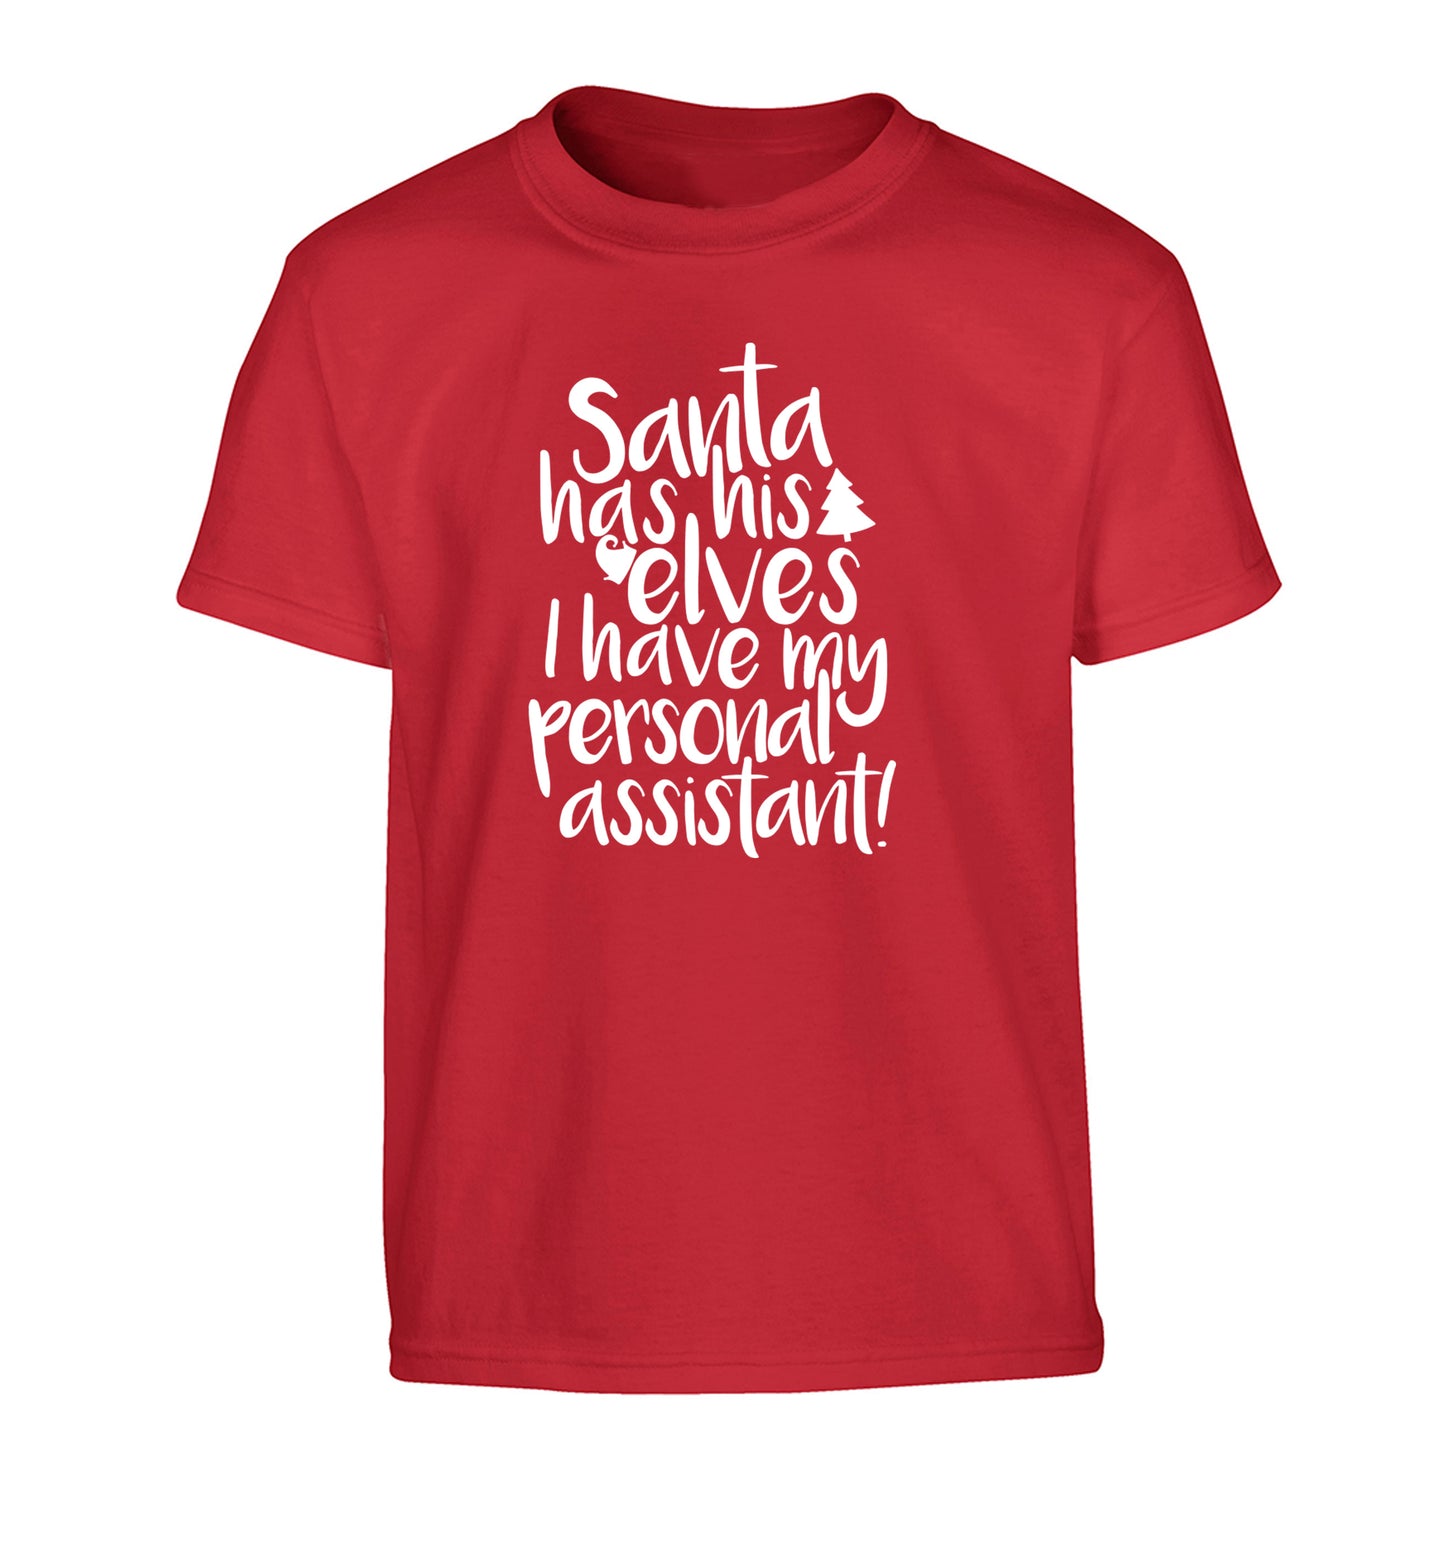 Santa has his elves I have my personal assistant Children's red Tshirt 12-14 Years